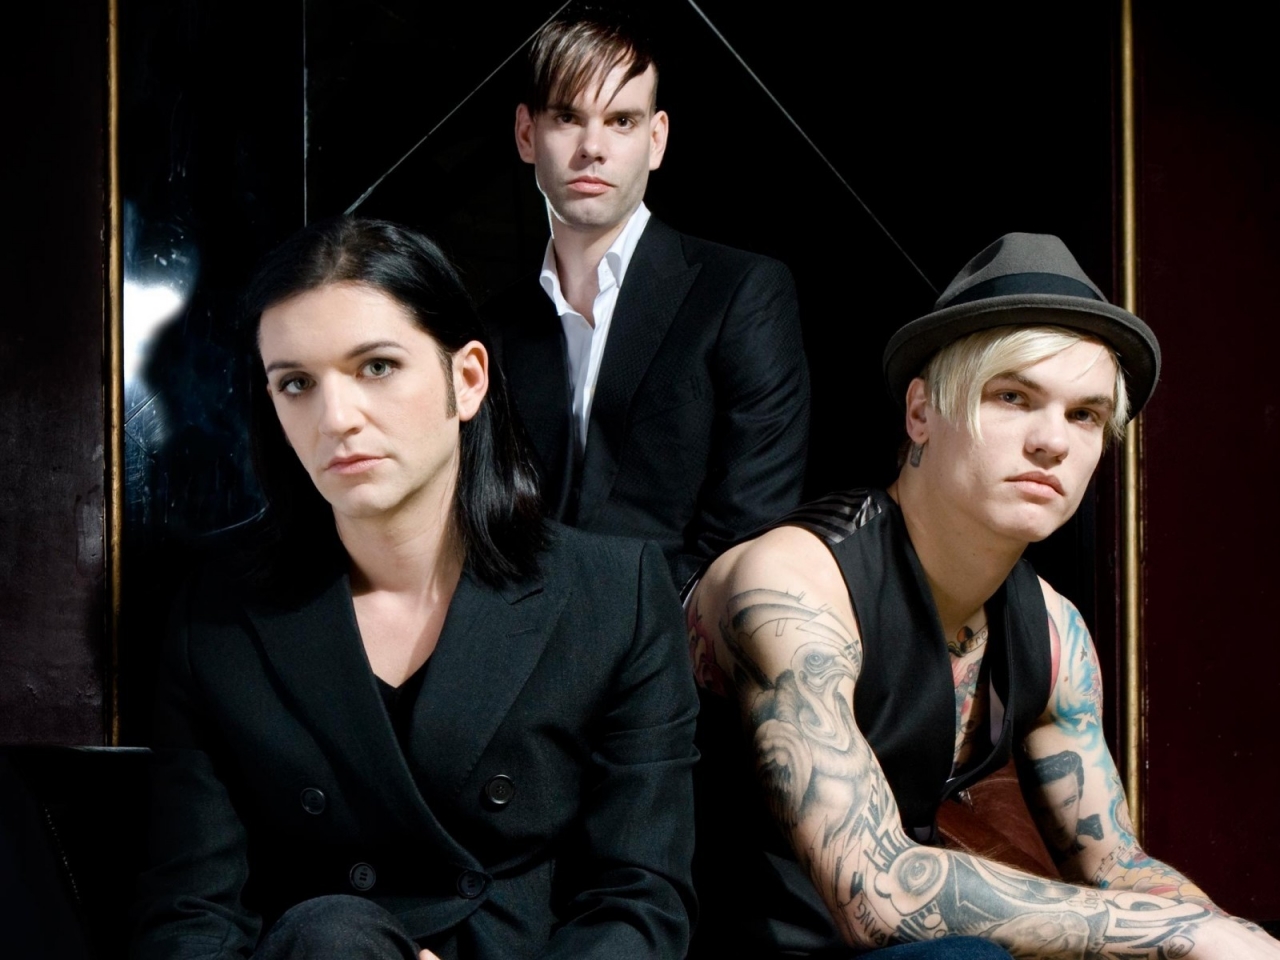 Placebo Band Poster for 1280 x 960 resolution